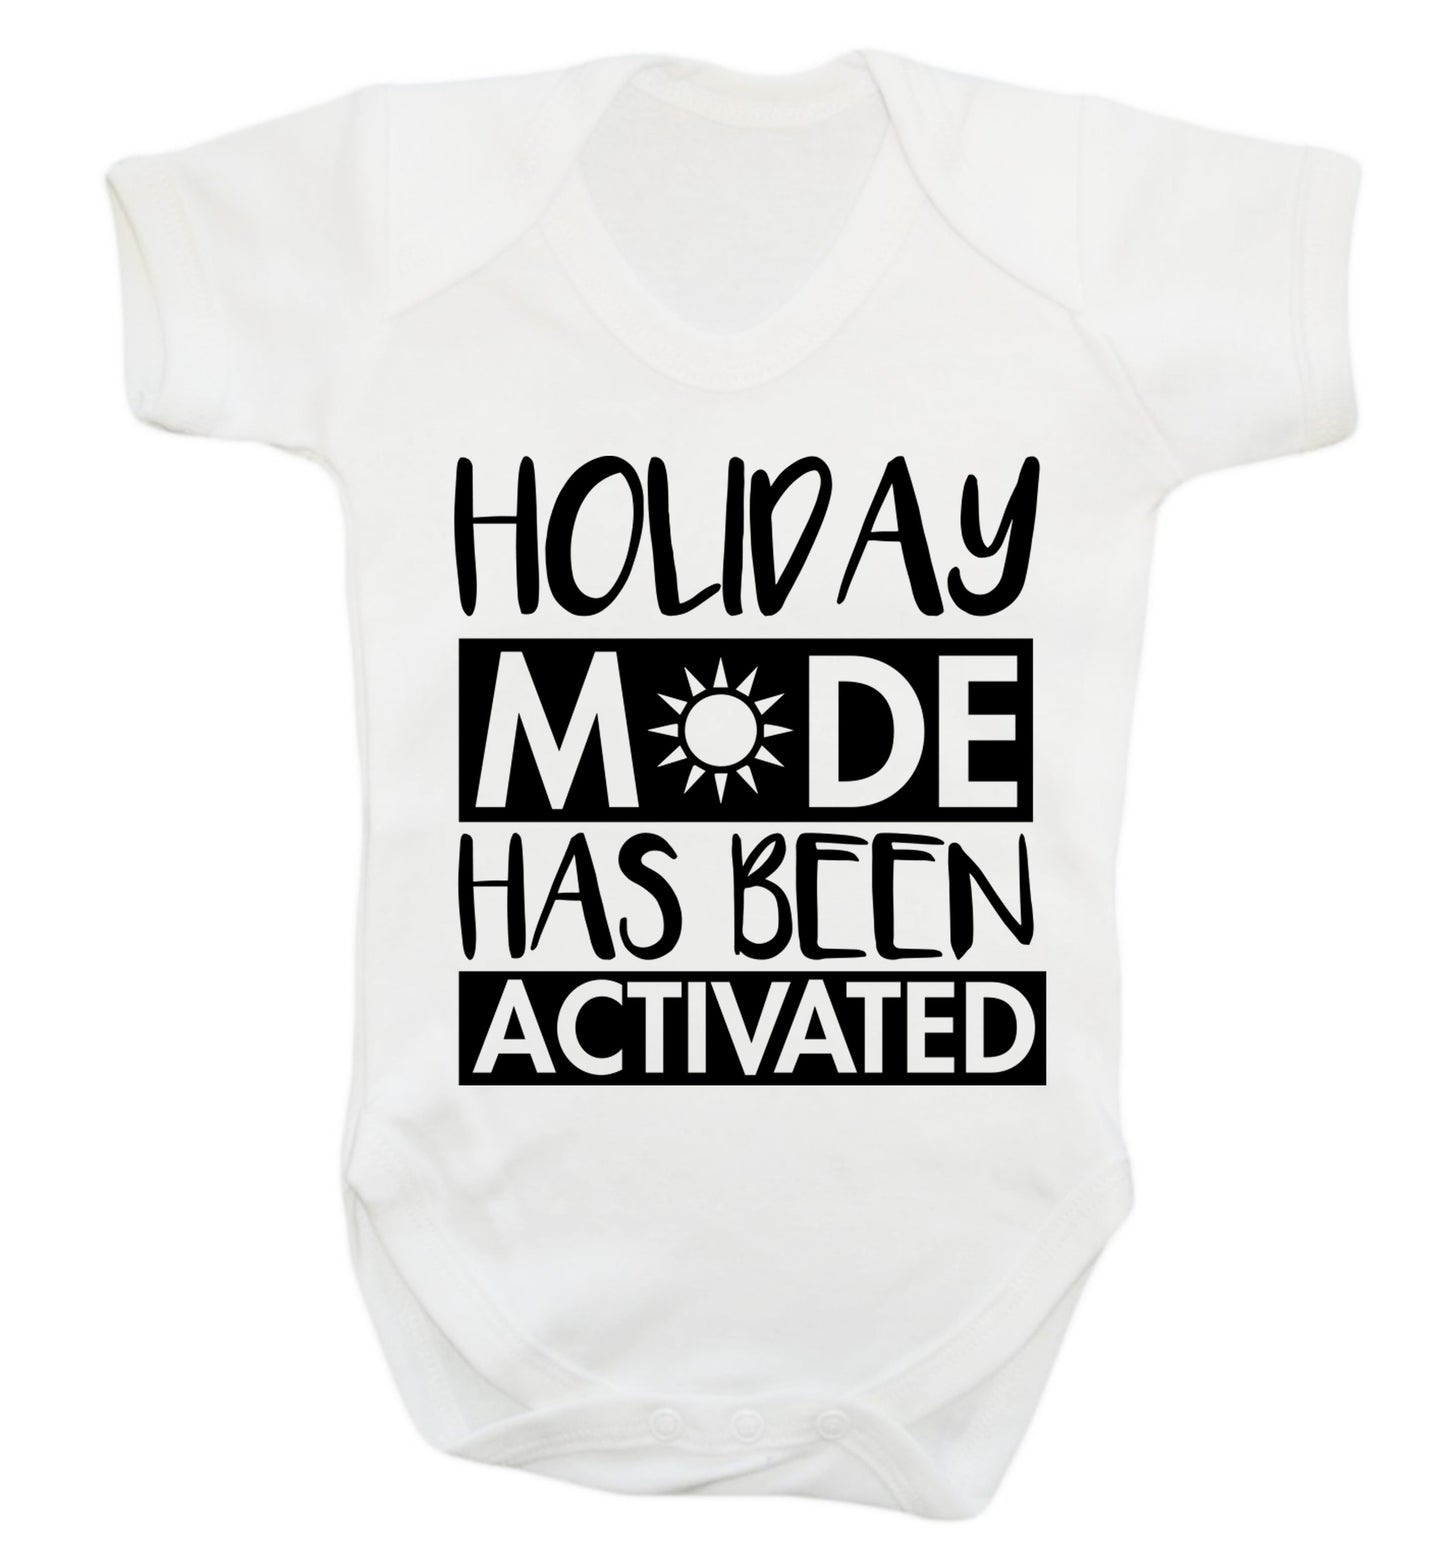 Holiday mode has been activated Baby Vest white 18-24 months